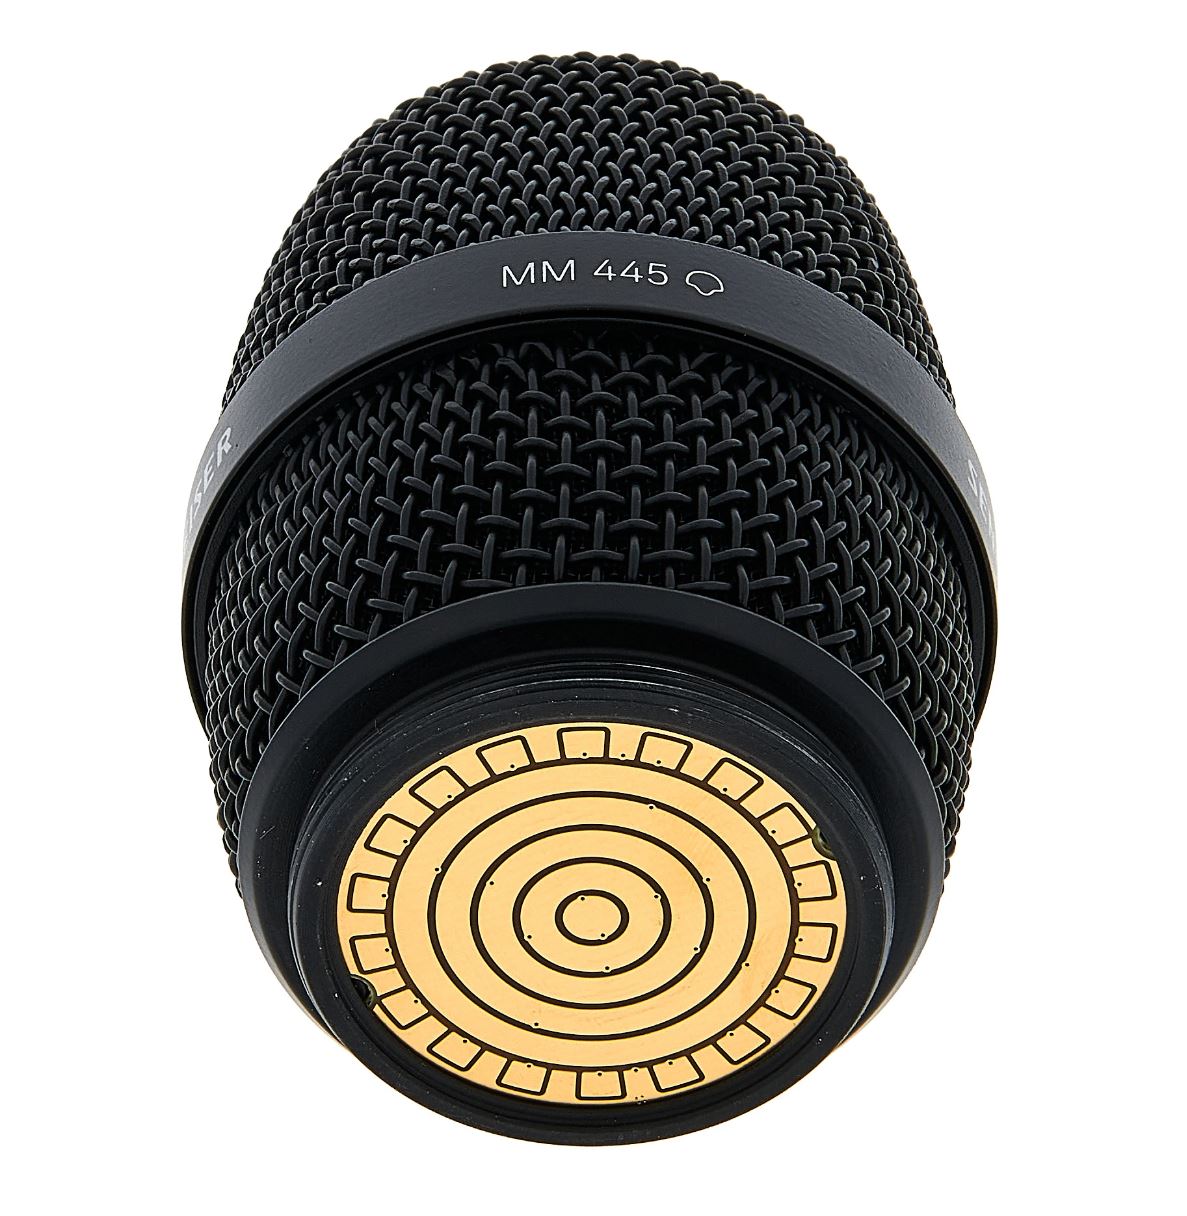 Sennheiser MM 445 Microphone Module Dynamic Supercardioid Capsule with Aluminum-Copper Voice Coil for Handheld Wireless Transmitters